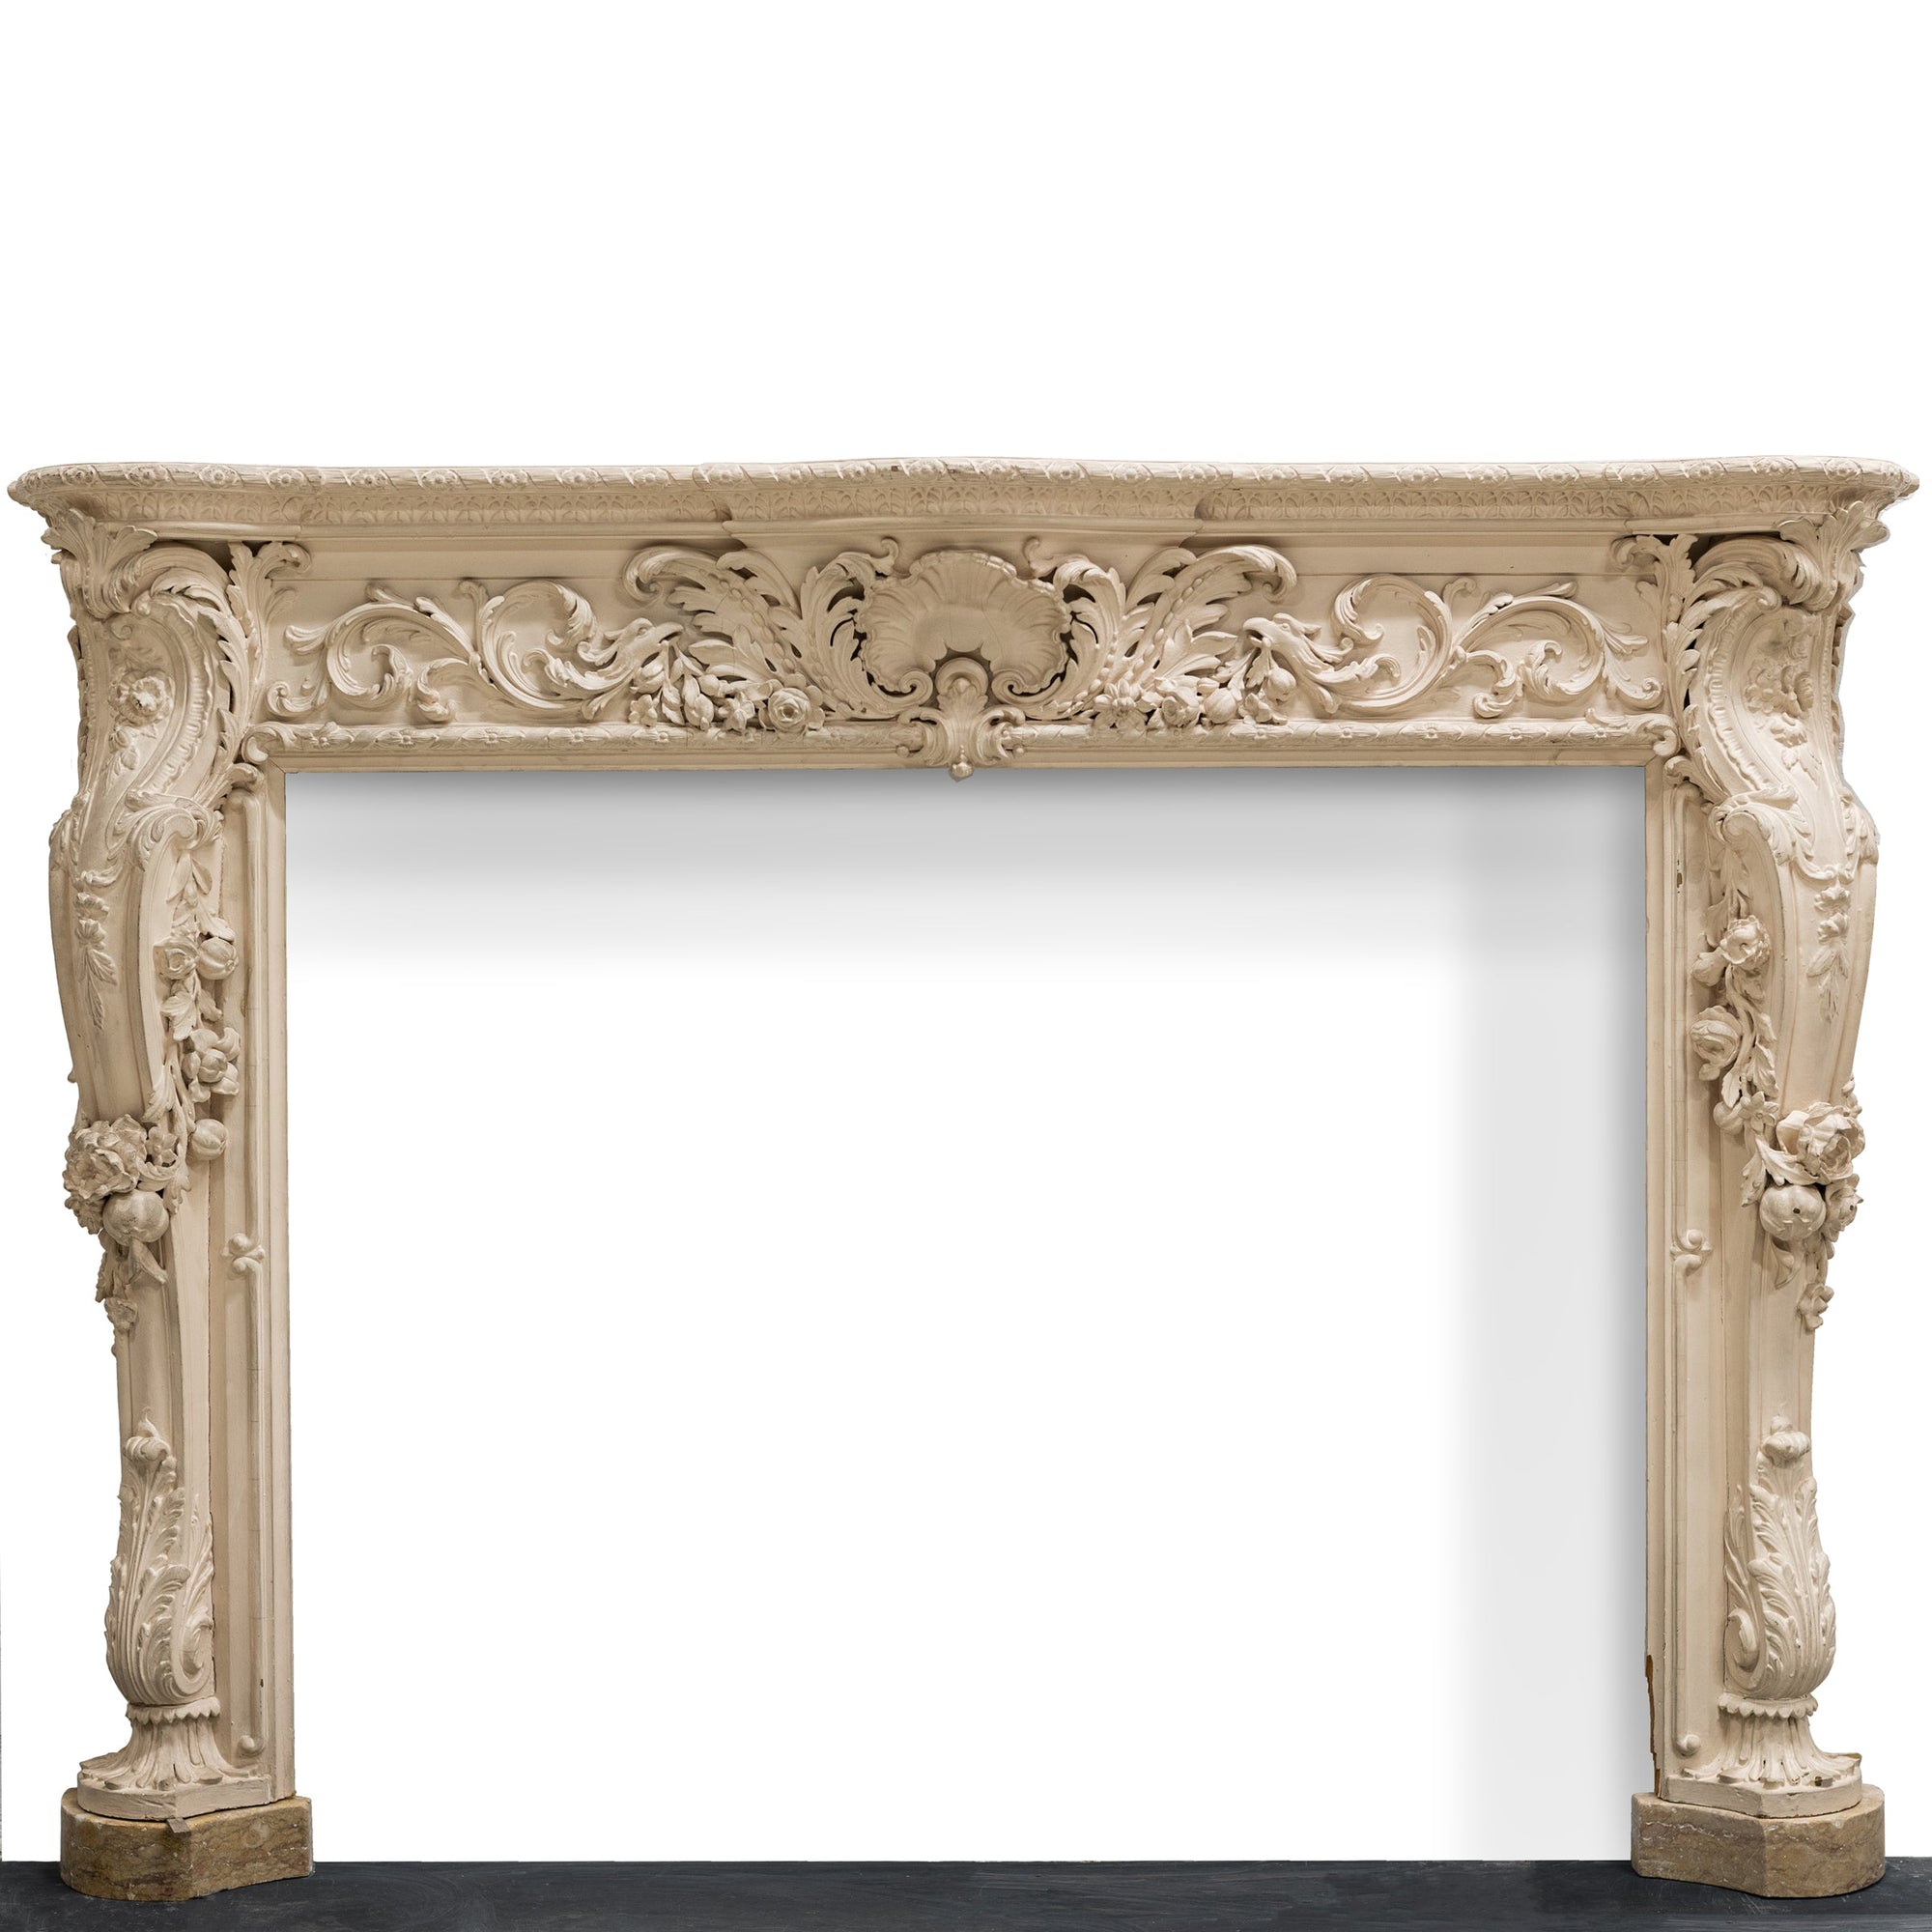 Antique Rococo Style Carved Wood & Gesso Surround | The Architectural Forum